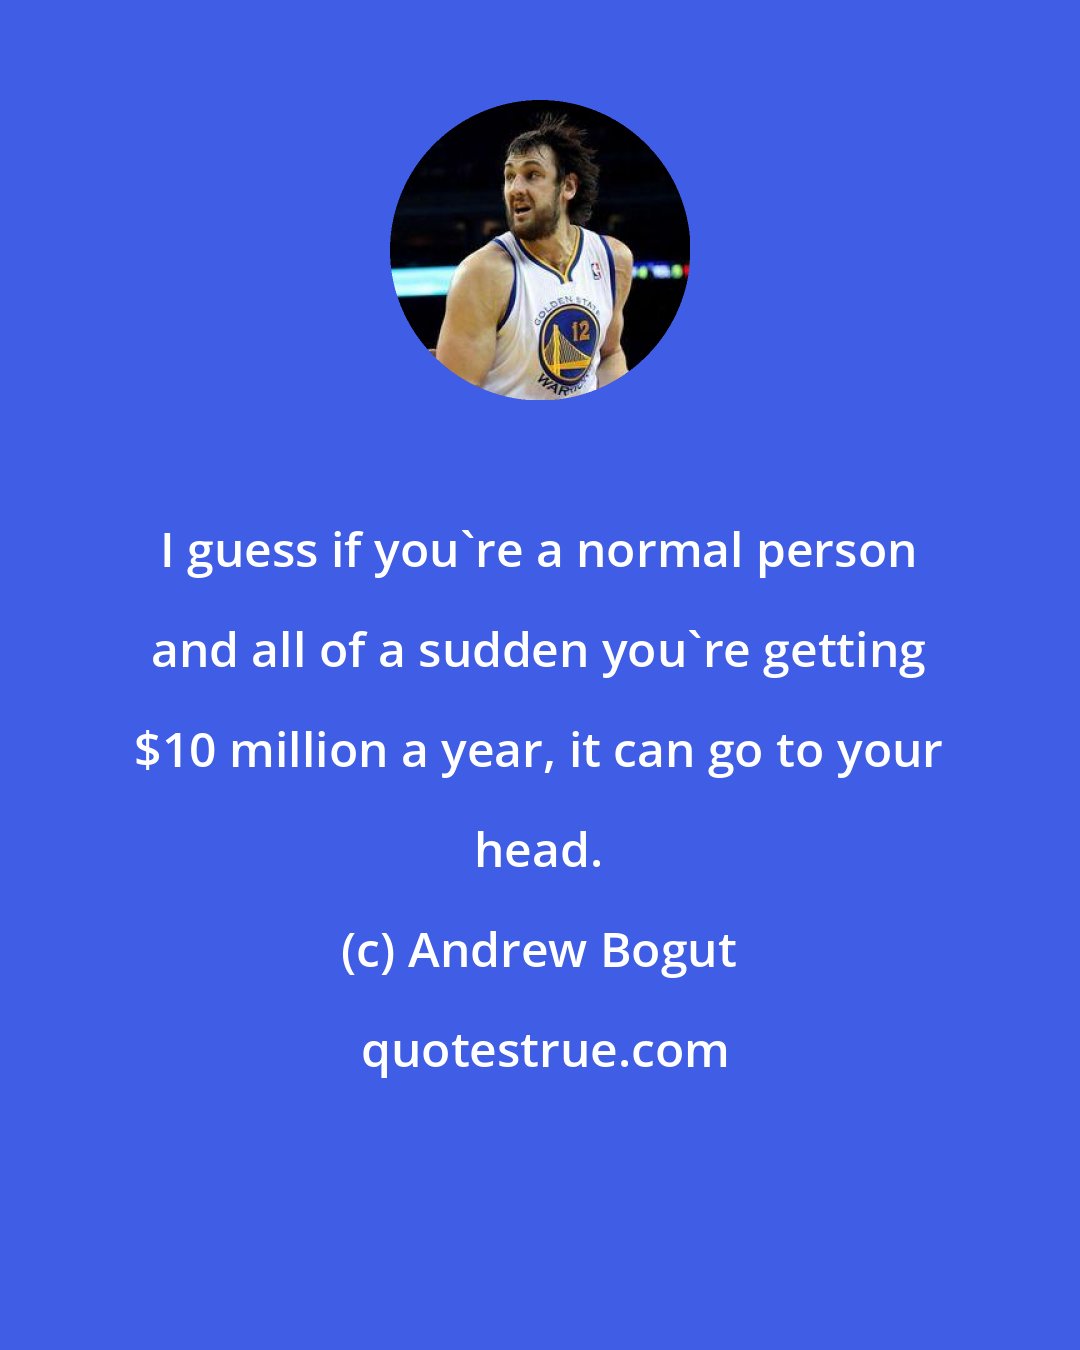 Andrew Bogut: I guess if you're a normal person and all of a sudden you're getting $10 million a year, it can go to your head.